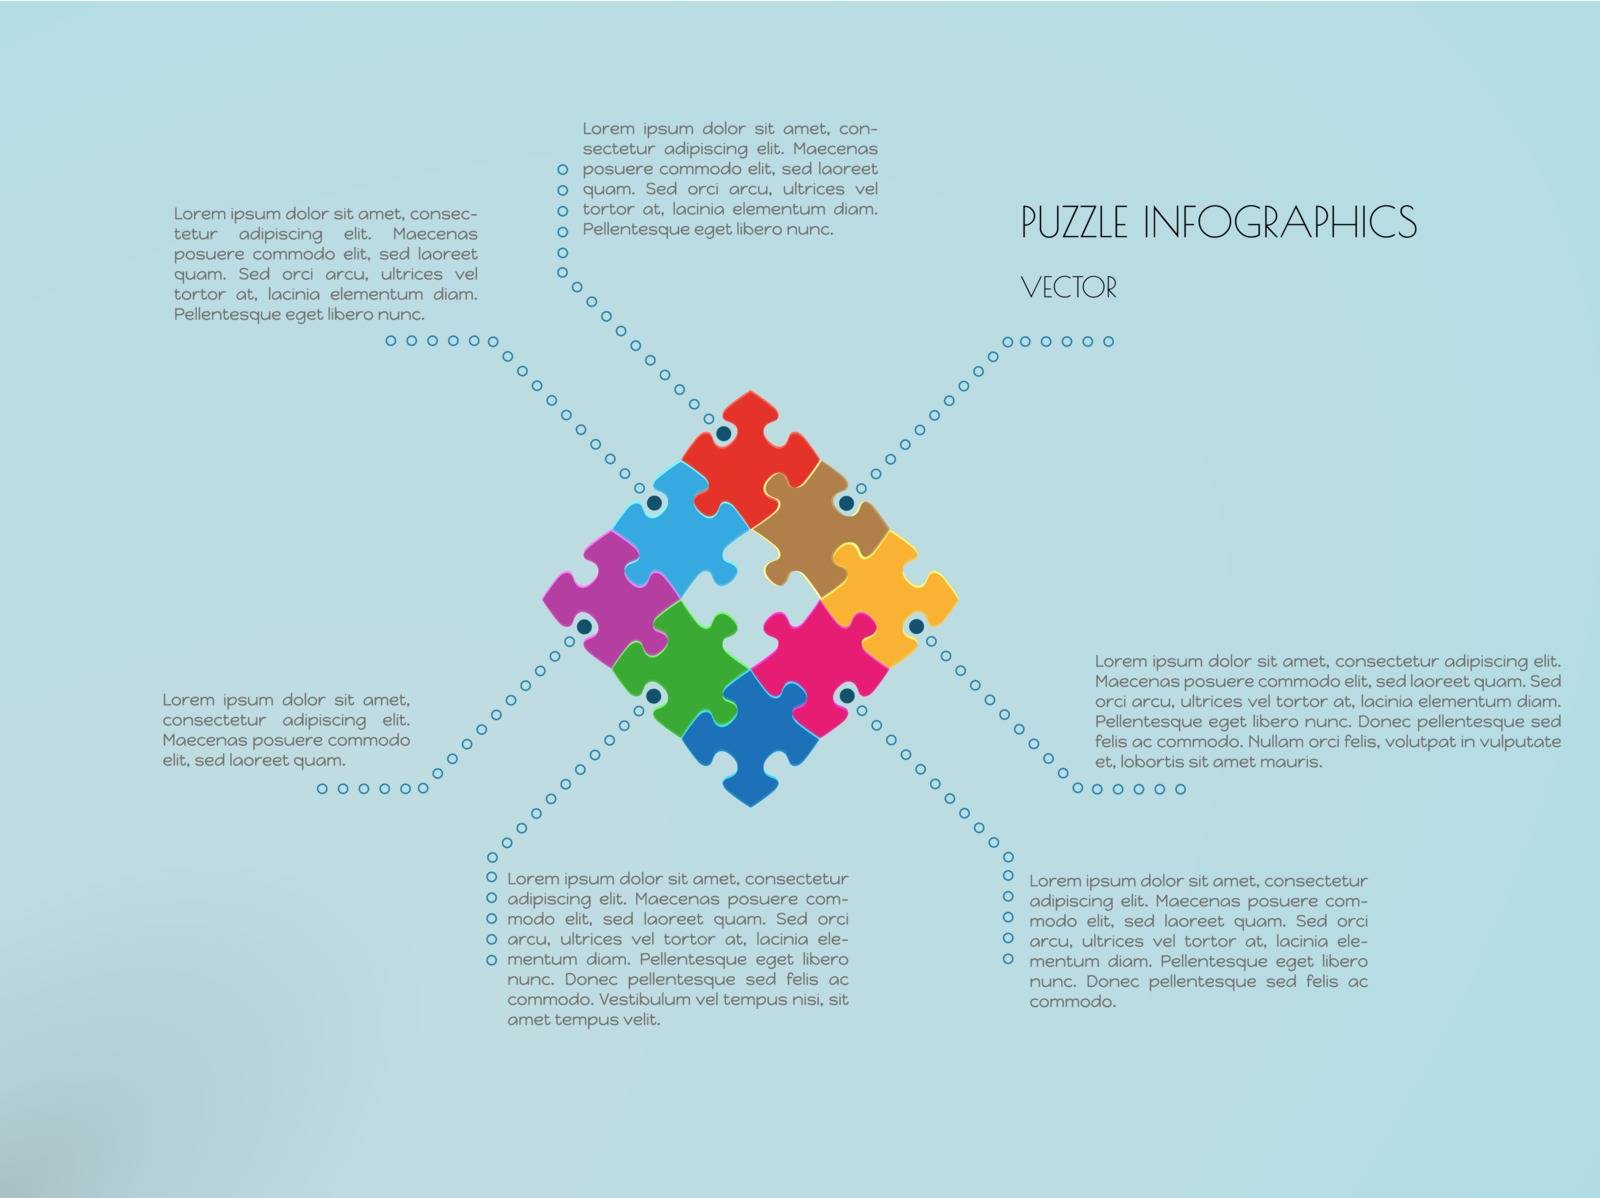 infographic vector with puzzle pieces on blue background